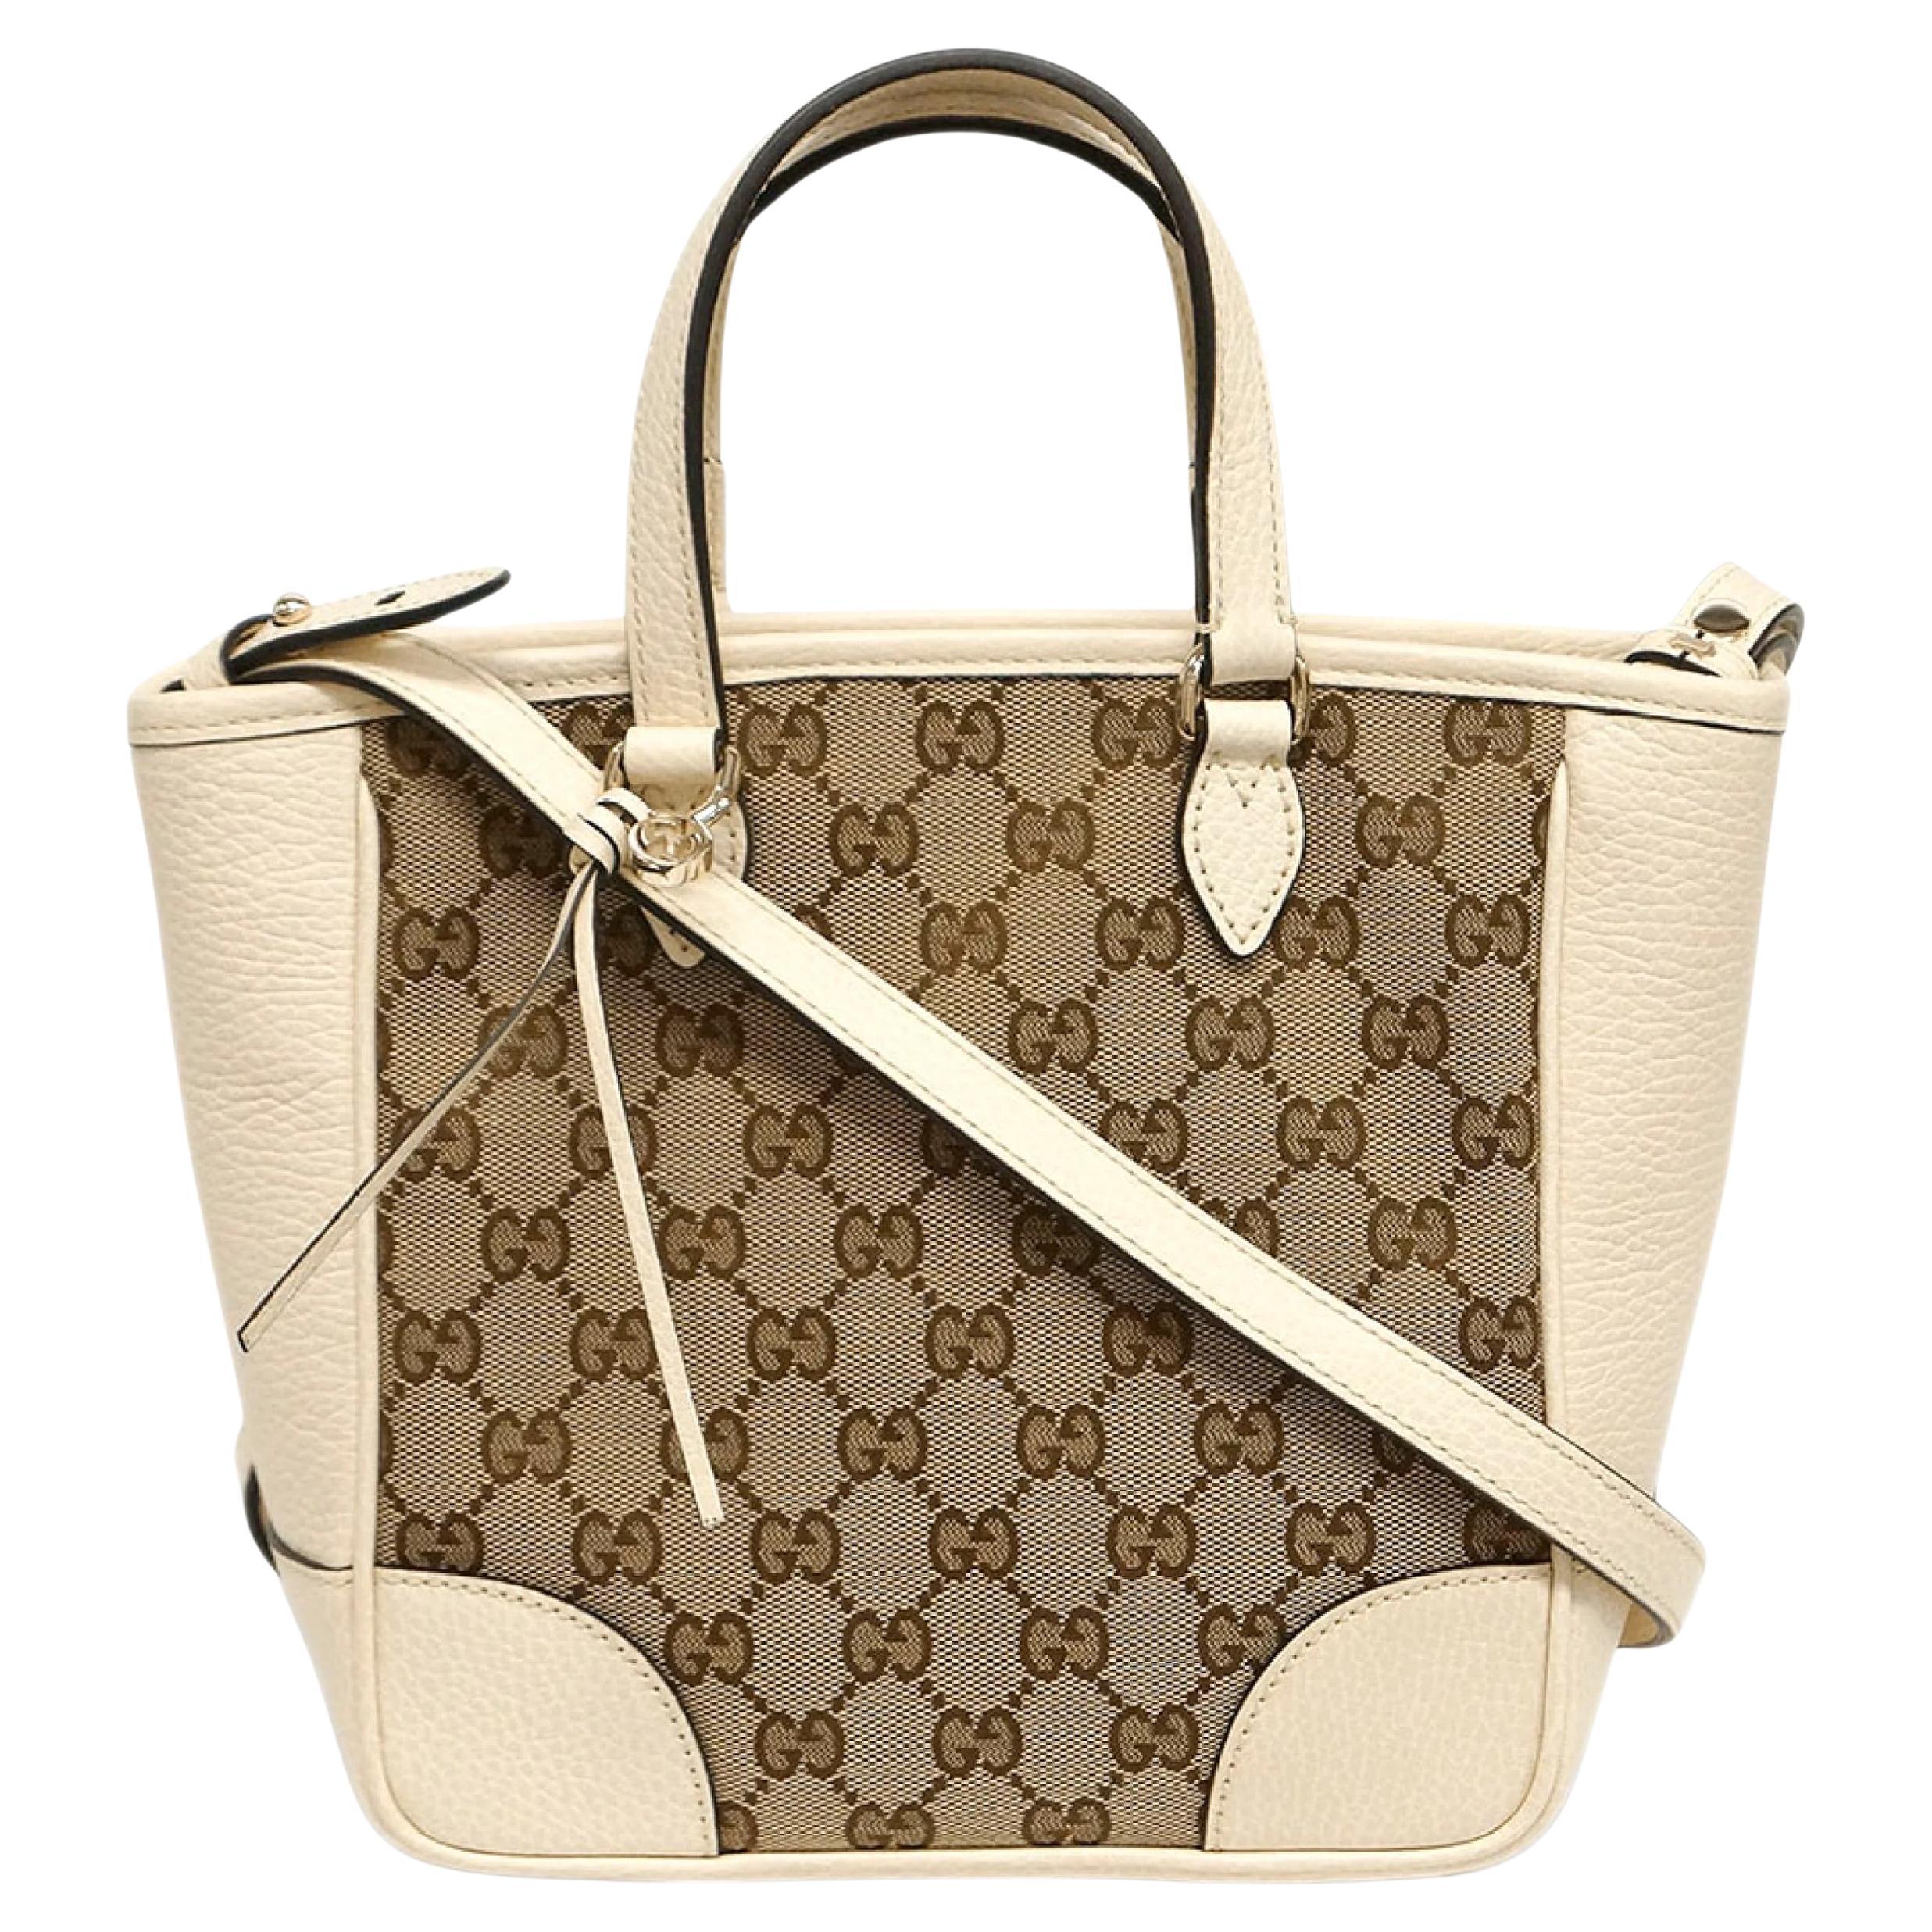 Gucci Brown/Beige GG Canvas and Leather Bree Crossbody Bag Gucci